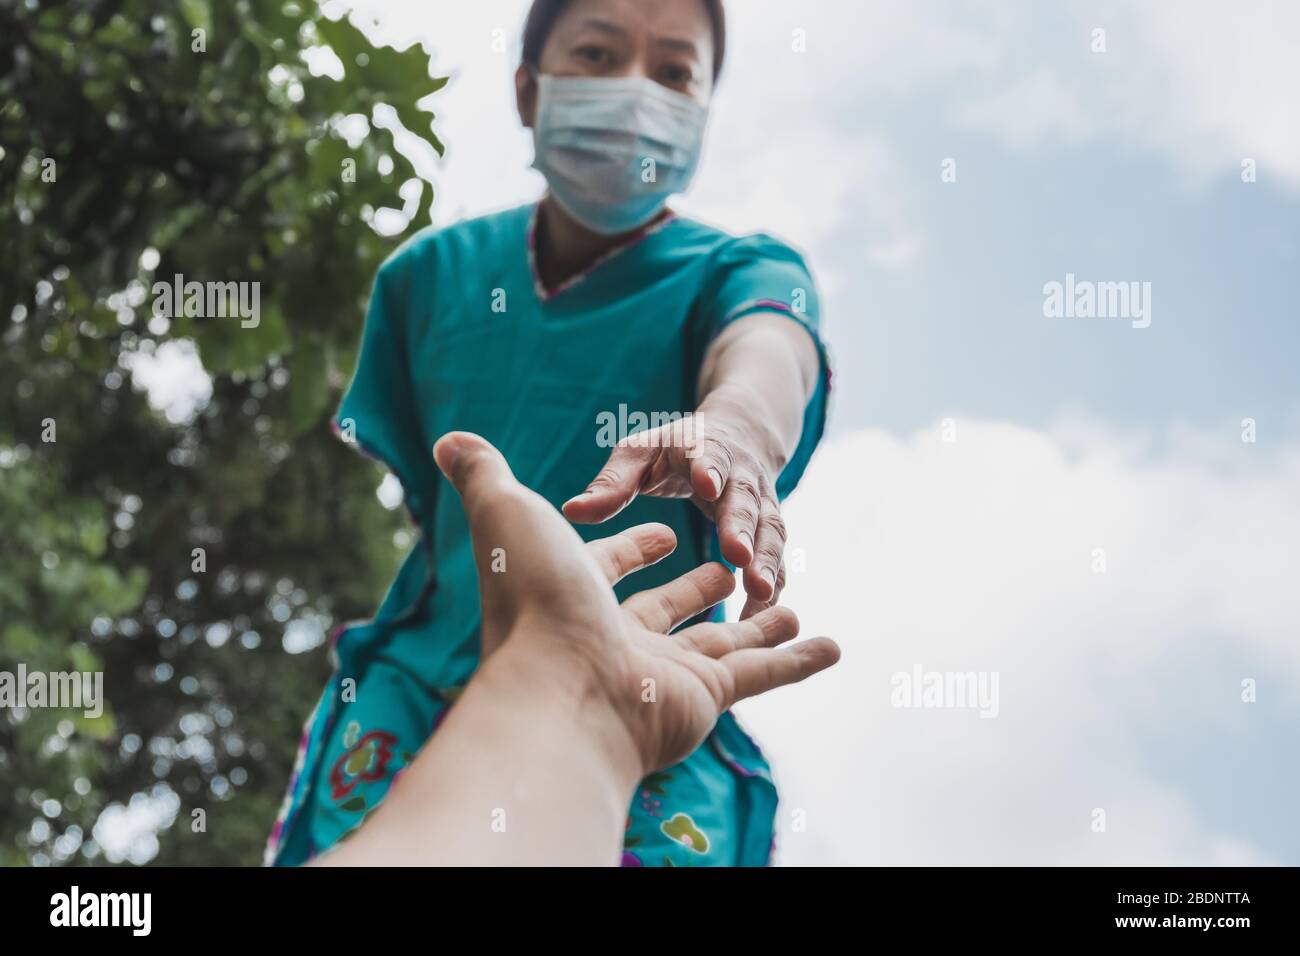 Hands of people in medical gloves reaching out for hope COVID-19 concept. Stock Photo